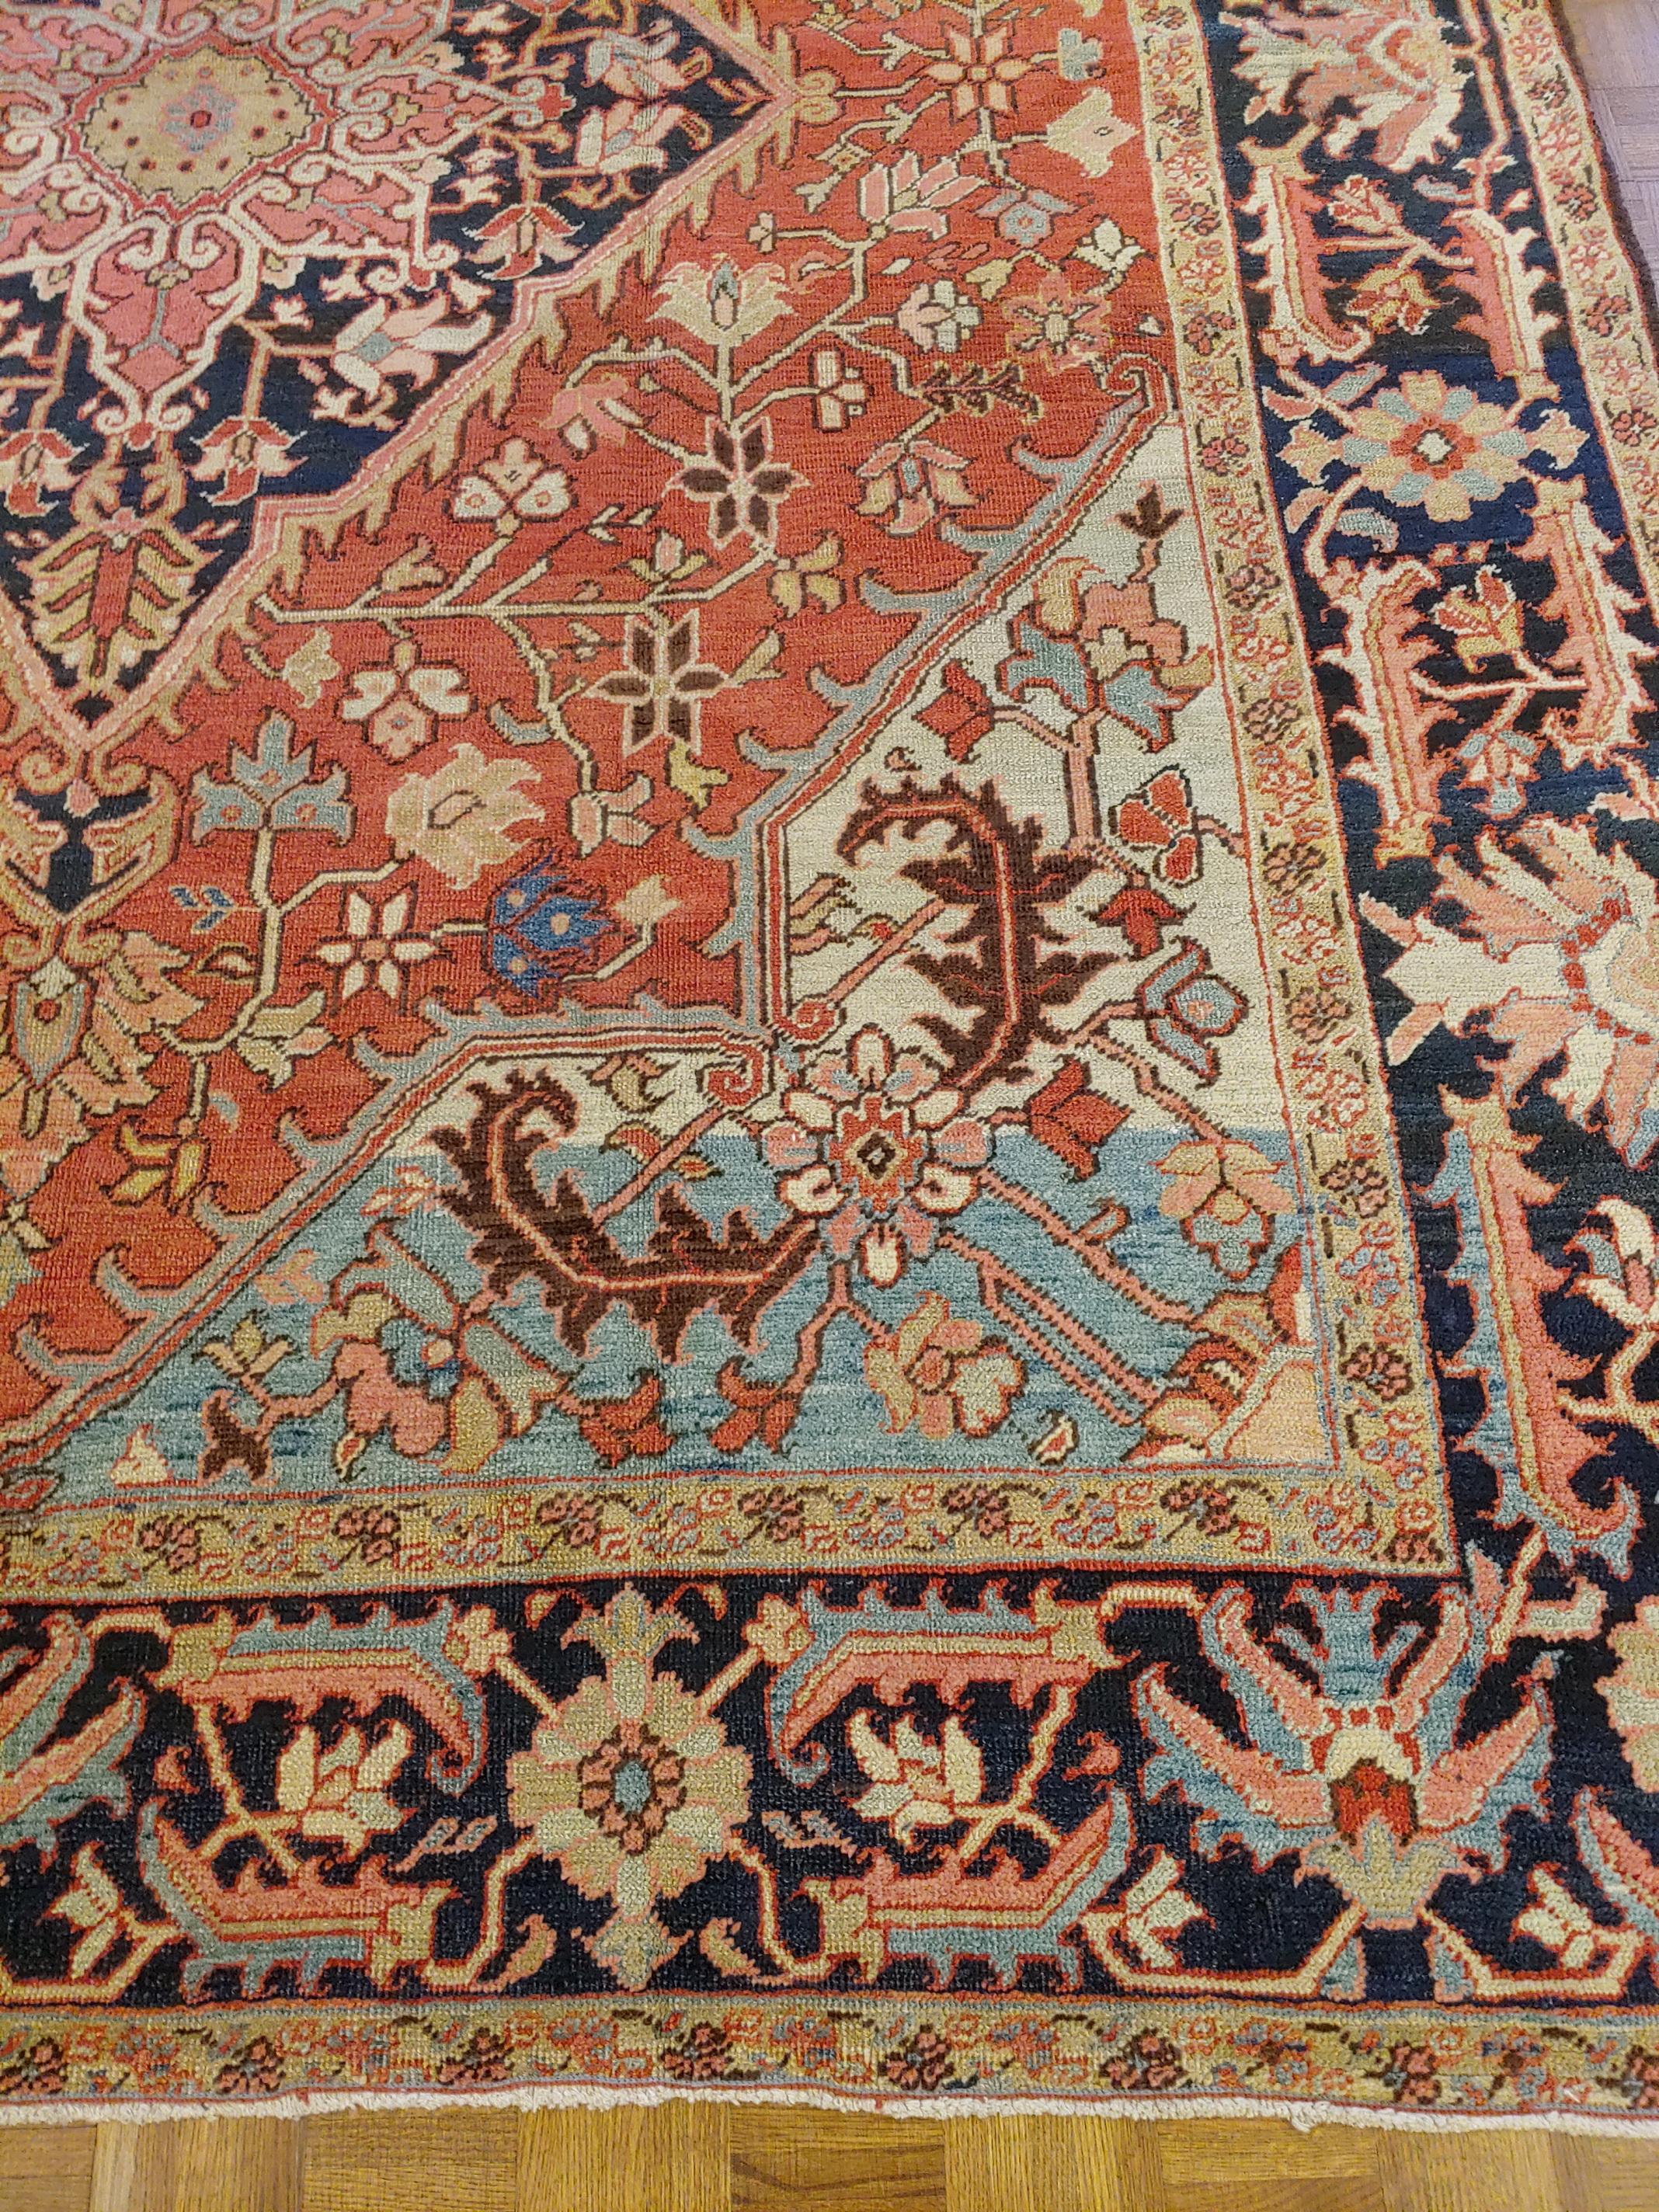 Woven Antique Persian Heriz Rug, Rust Colored, Wool, Room Size